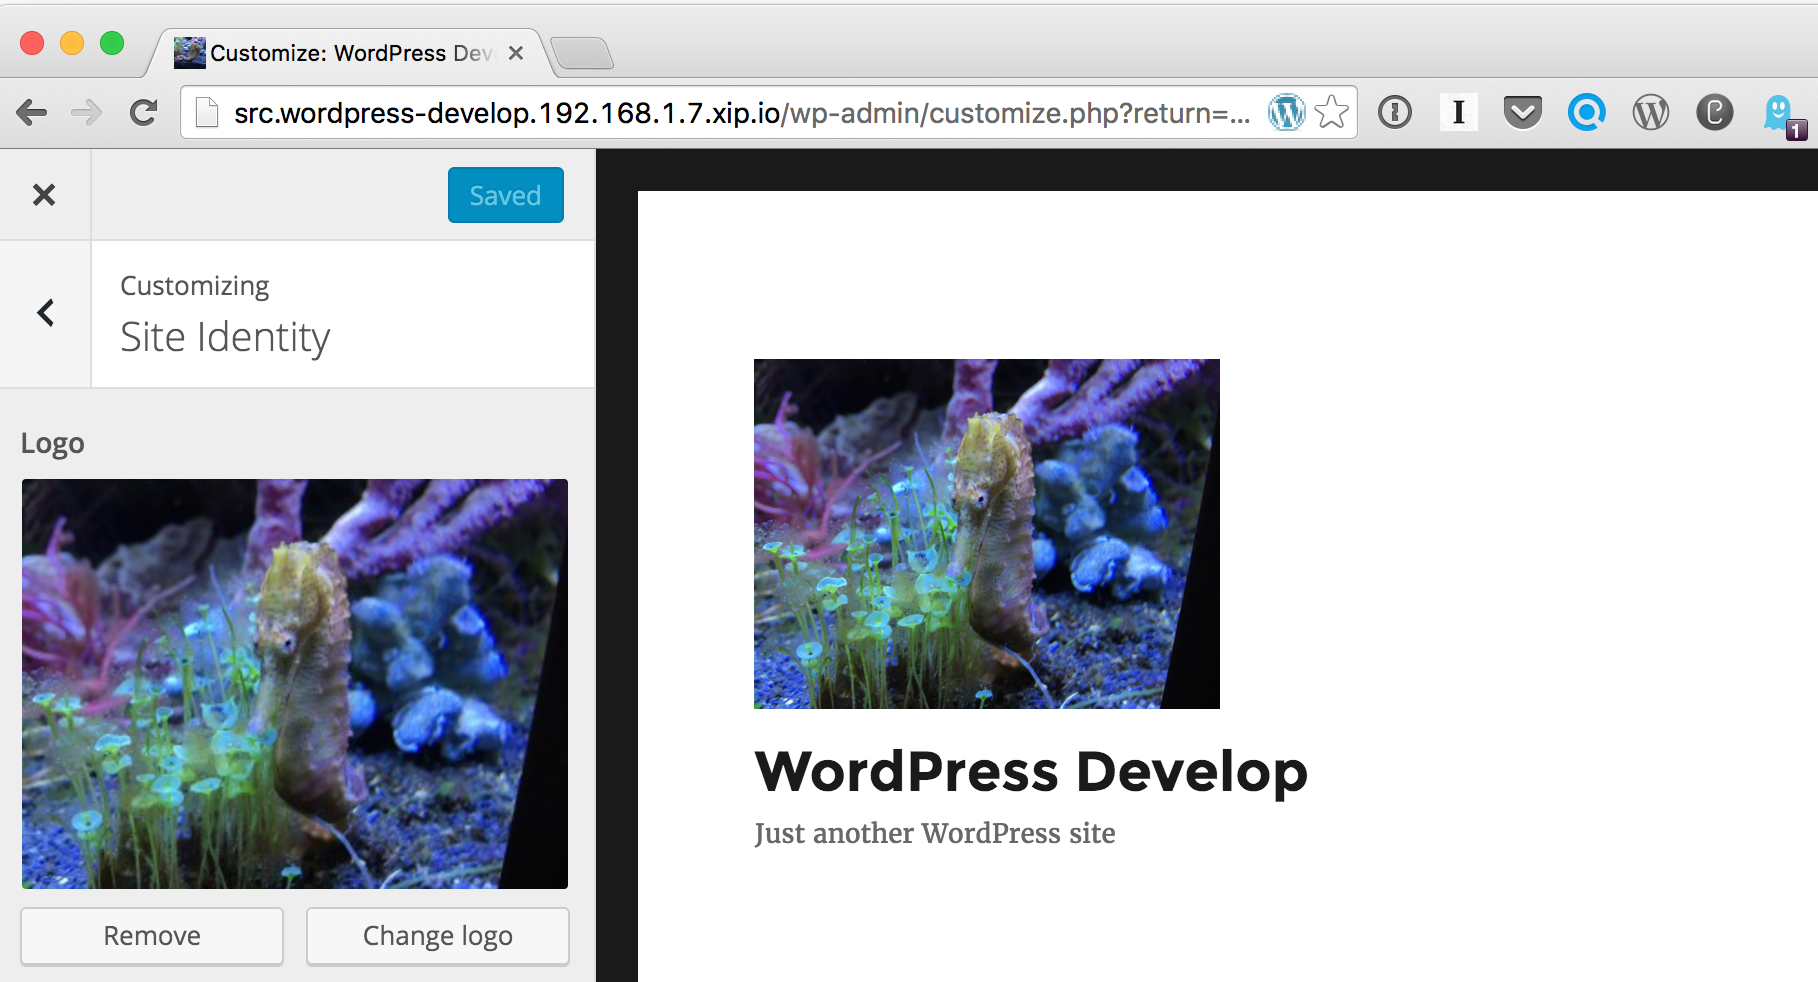 WordPress 4.5 to Introduce Native Support for a Theme Logo